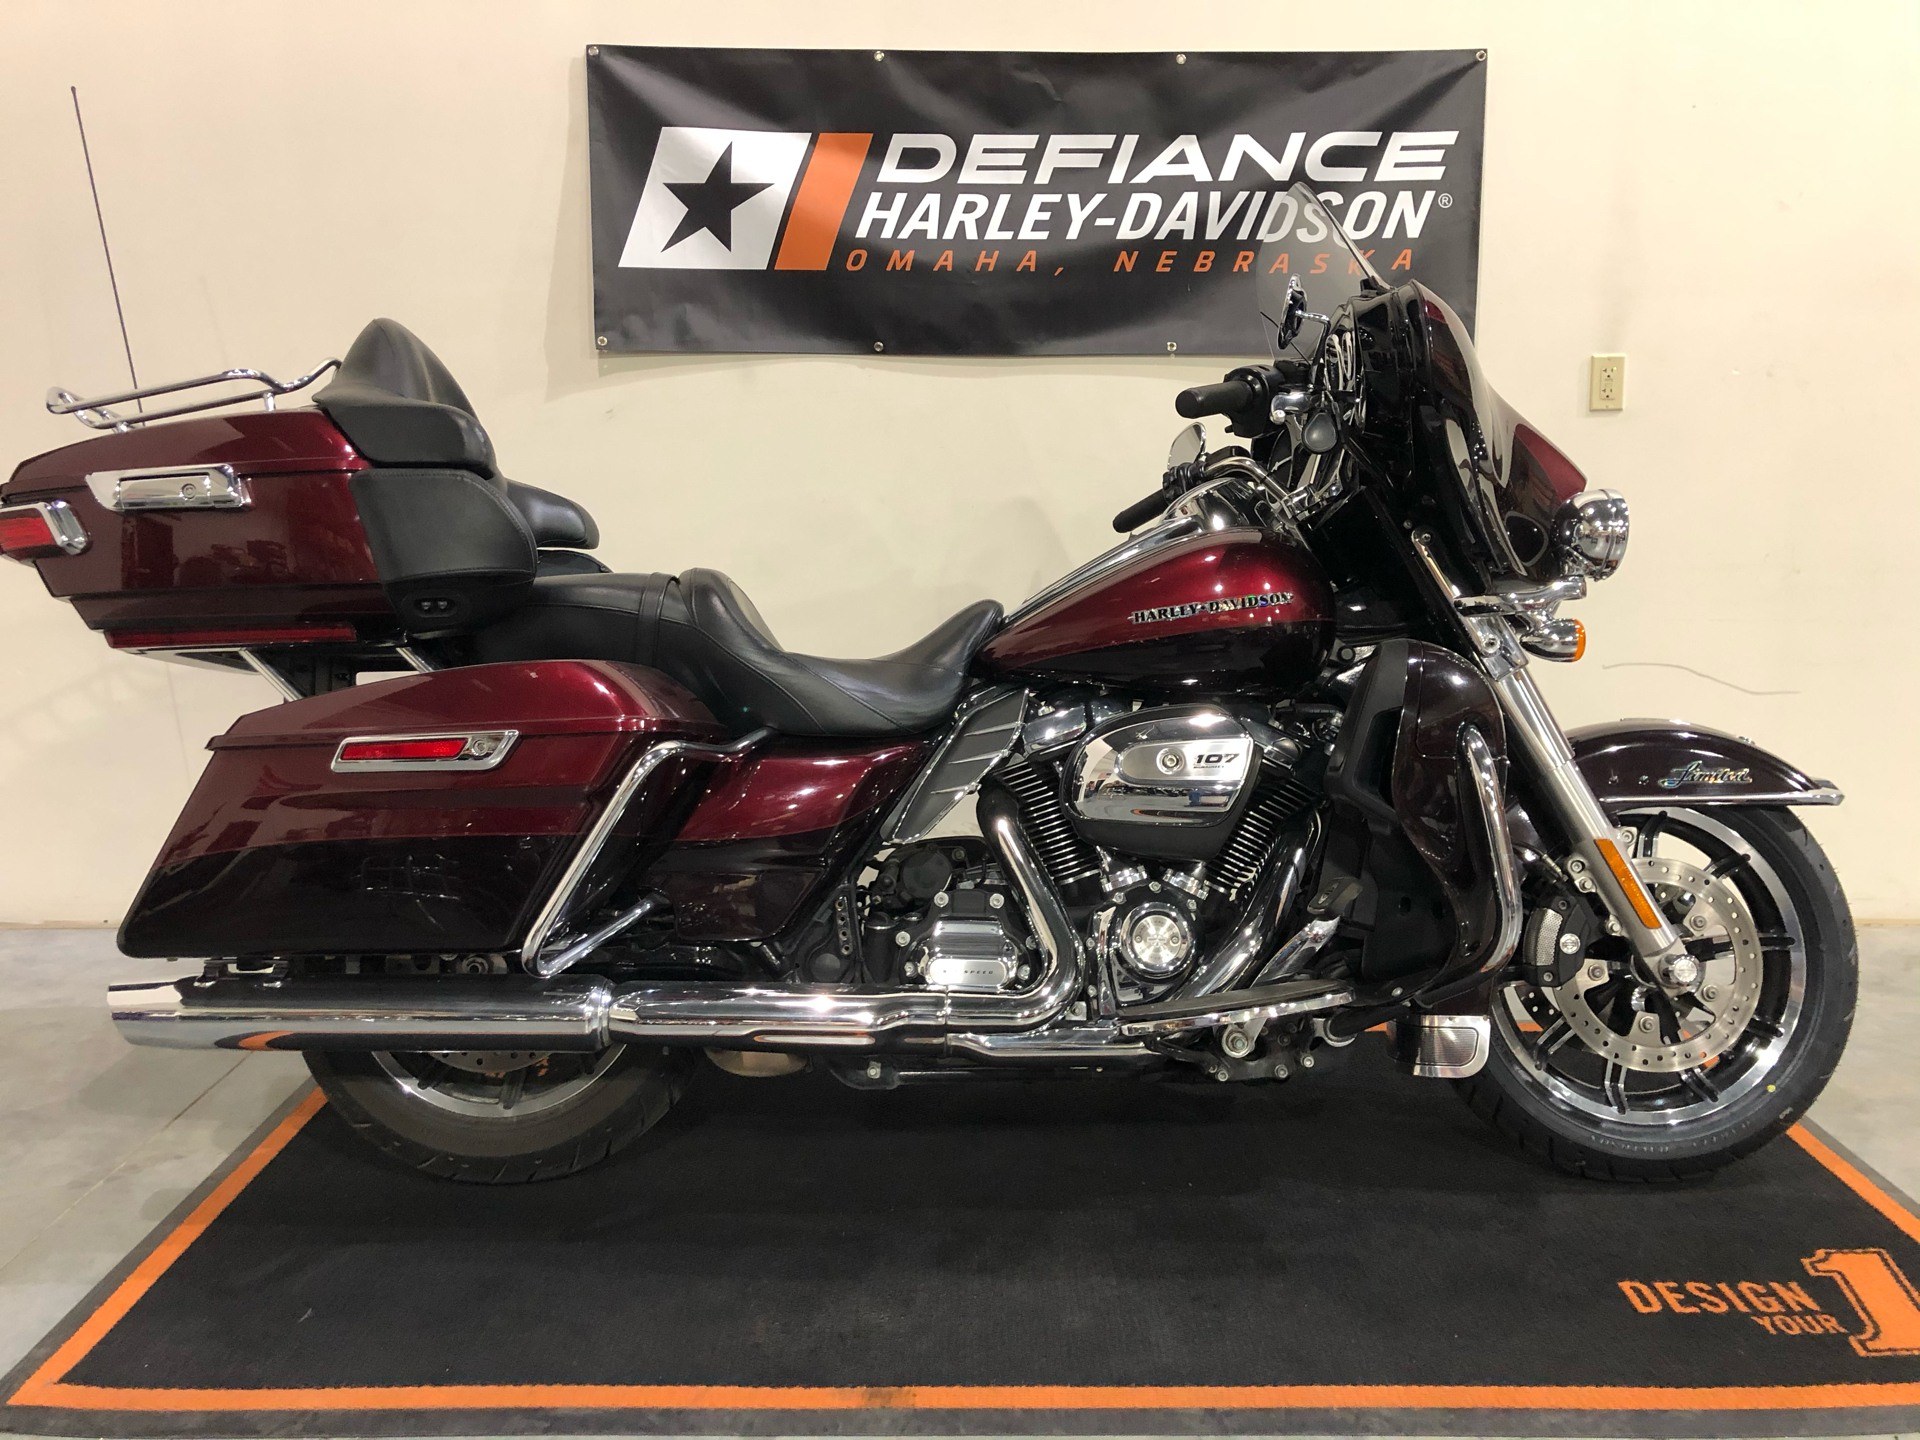 Used 2017 Harley Davidson Ultra Limited Mysterious Red Sunglo Velocity Red Sunglo Motorcycles In Loveland Co U 10989